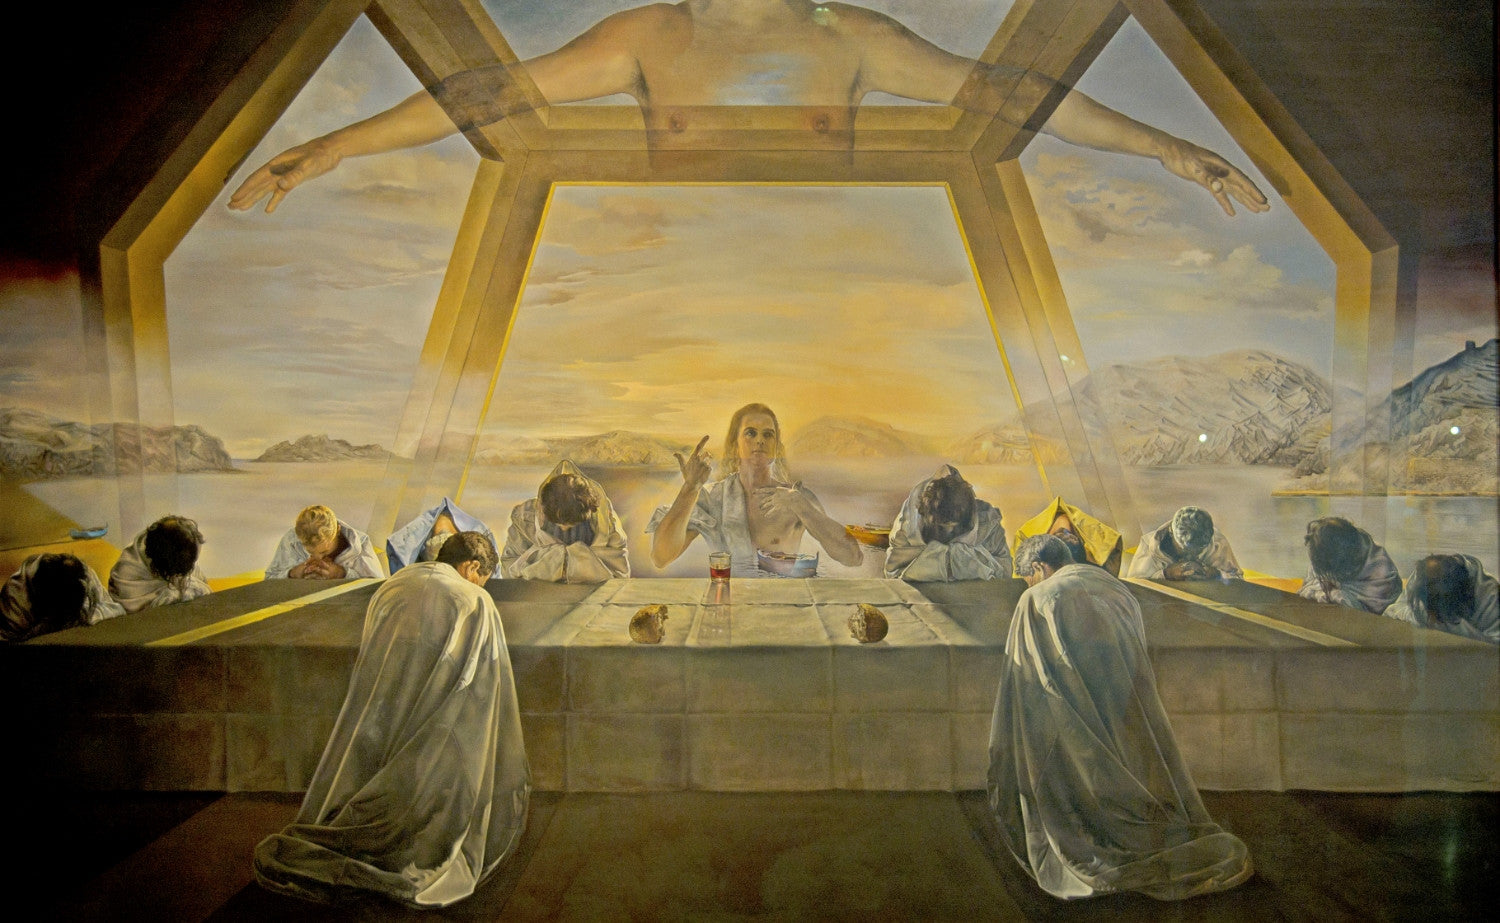 The Sacrament of The Last Supper by Salvador Dali | Buy Posters ...